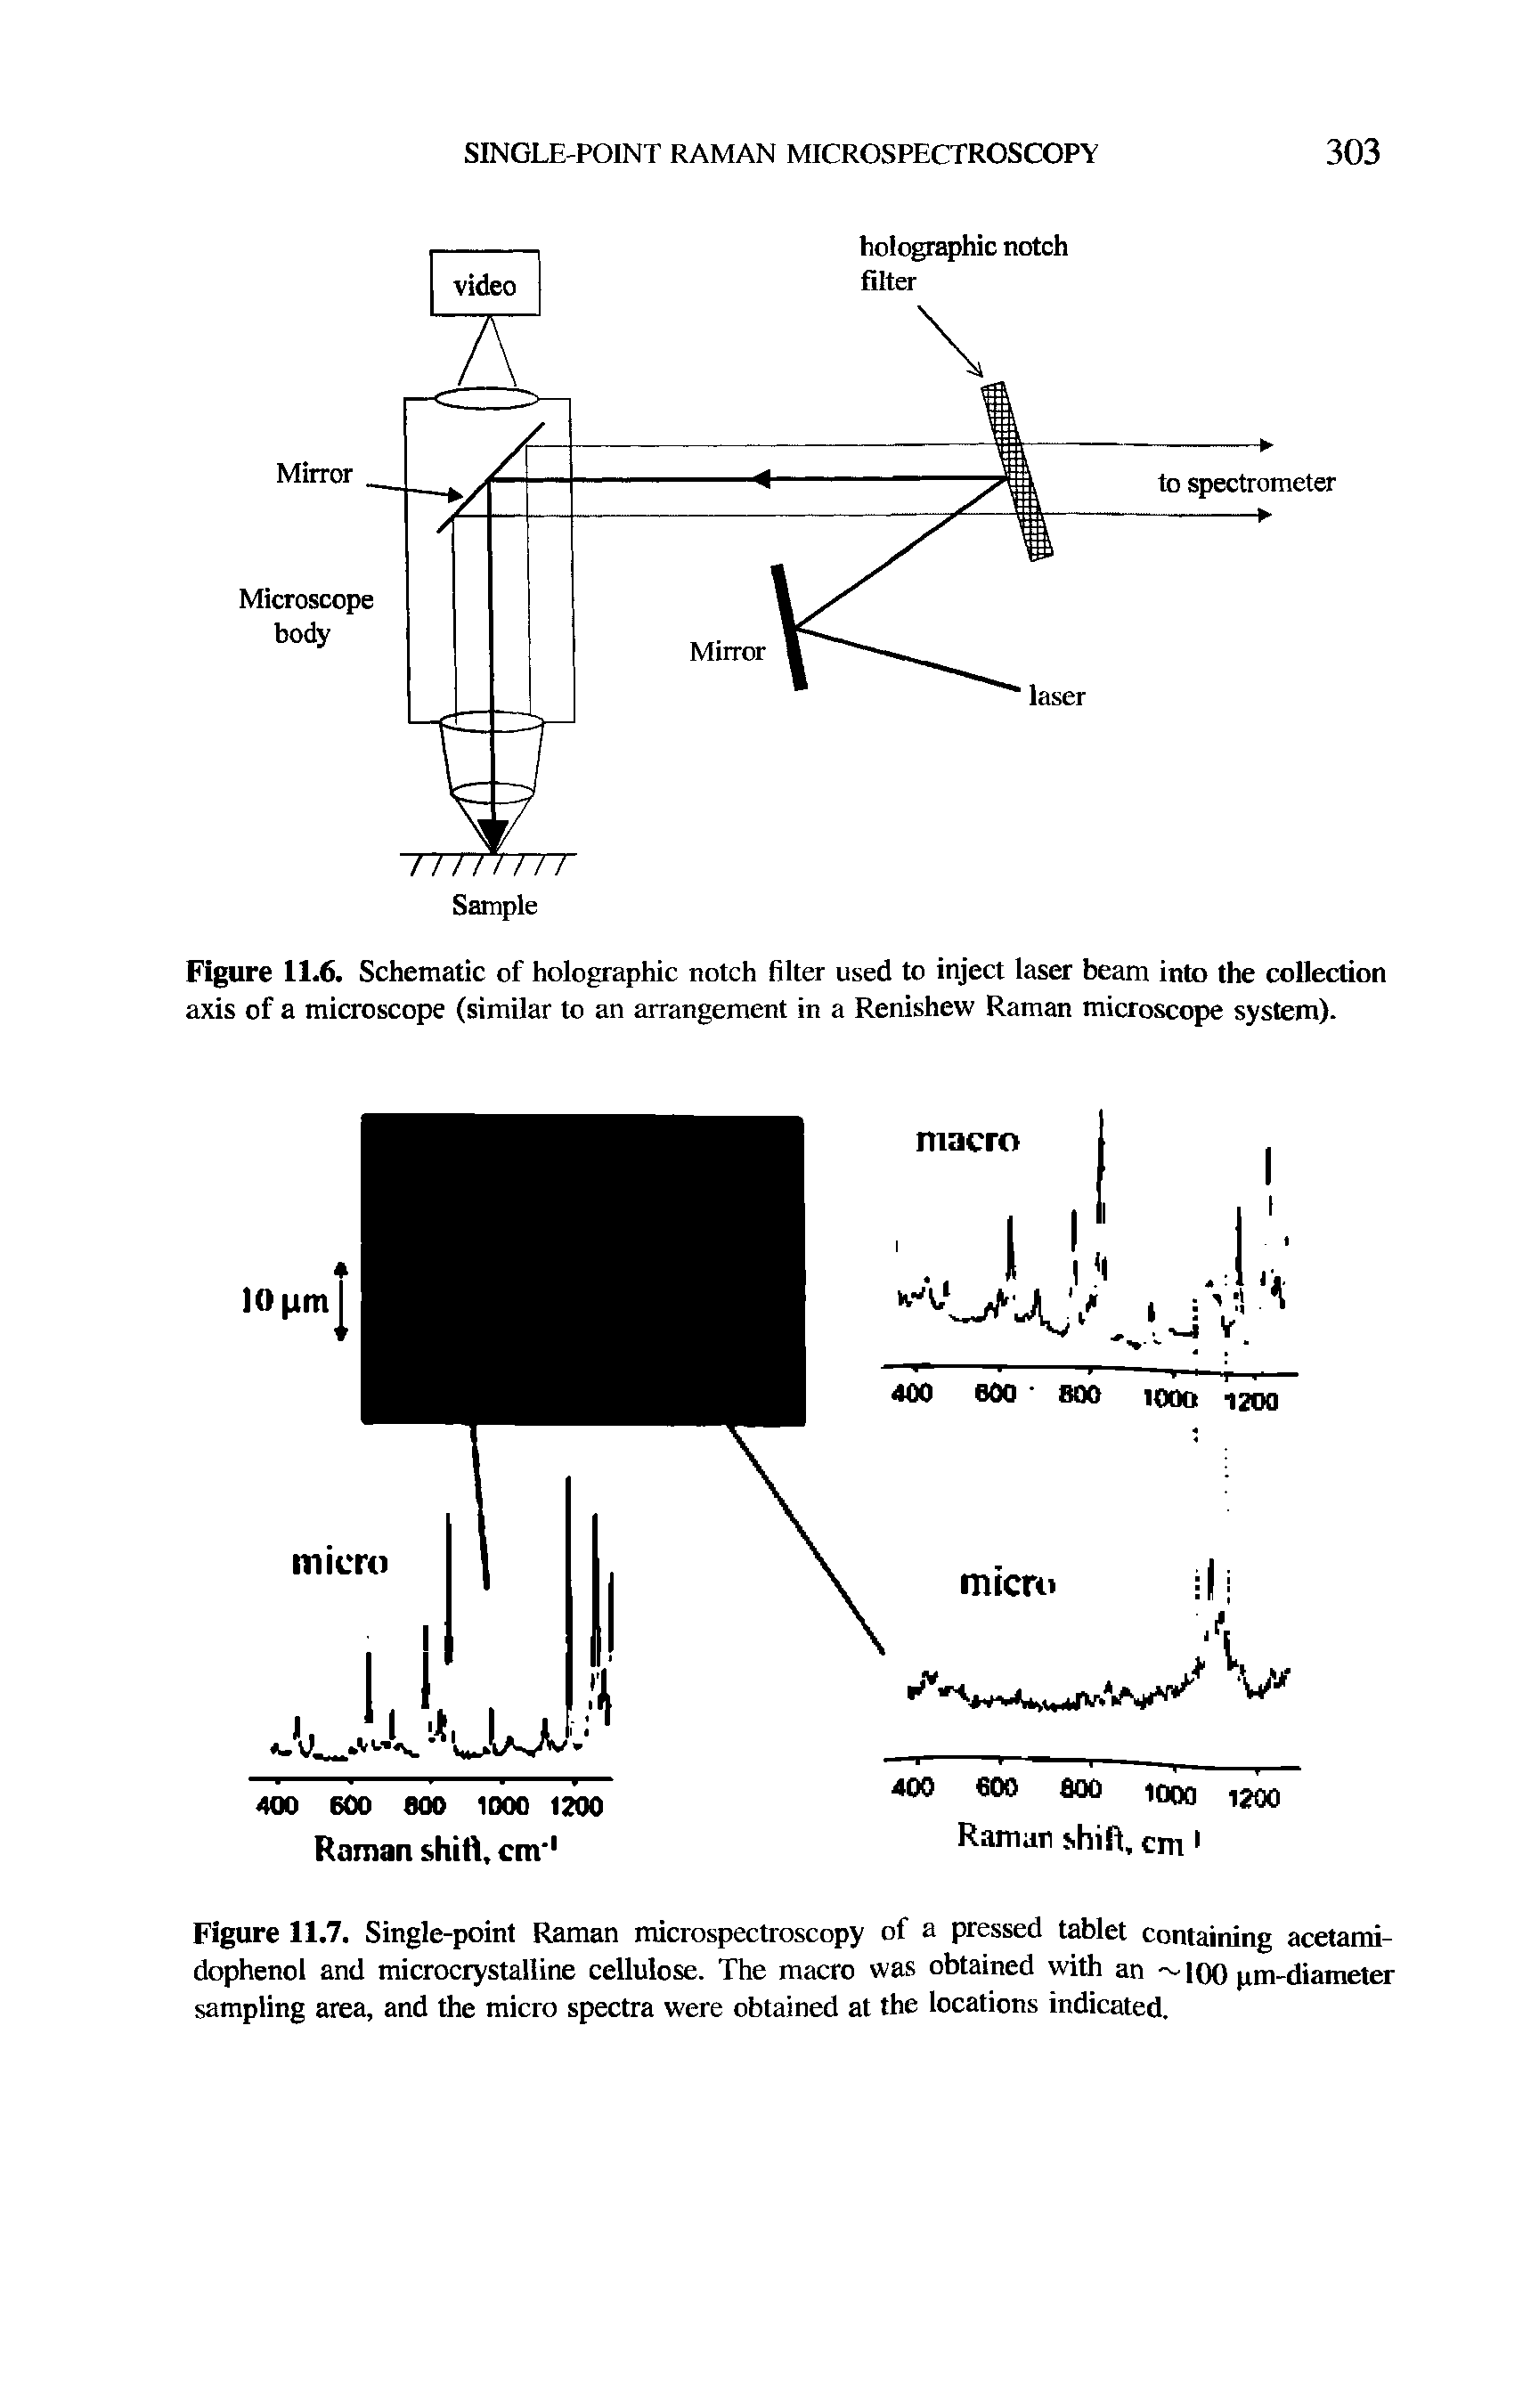 Figure 11.6. Schematic of holographic notch filter used to inject laser beam into the collection axis of a microscope (similar to an arrangement in a Renishew Raman microscope system).